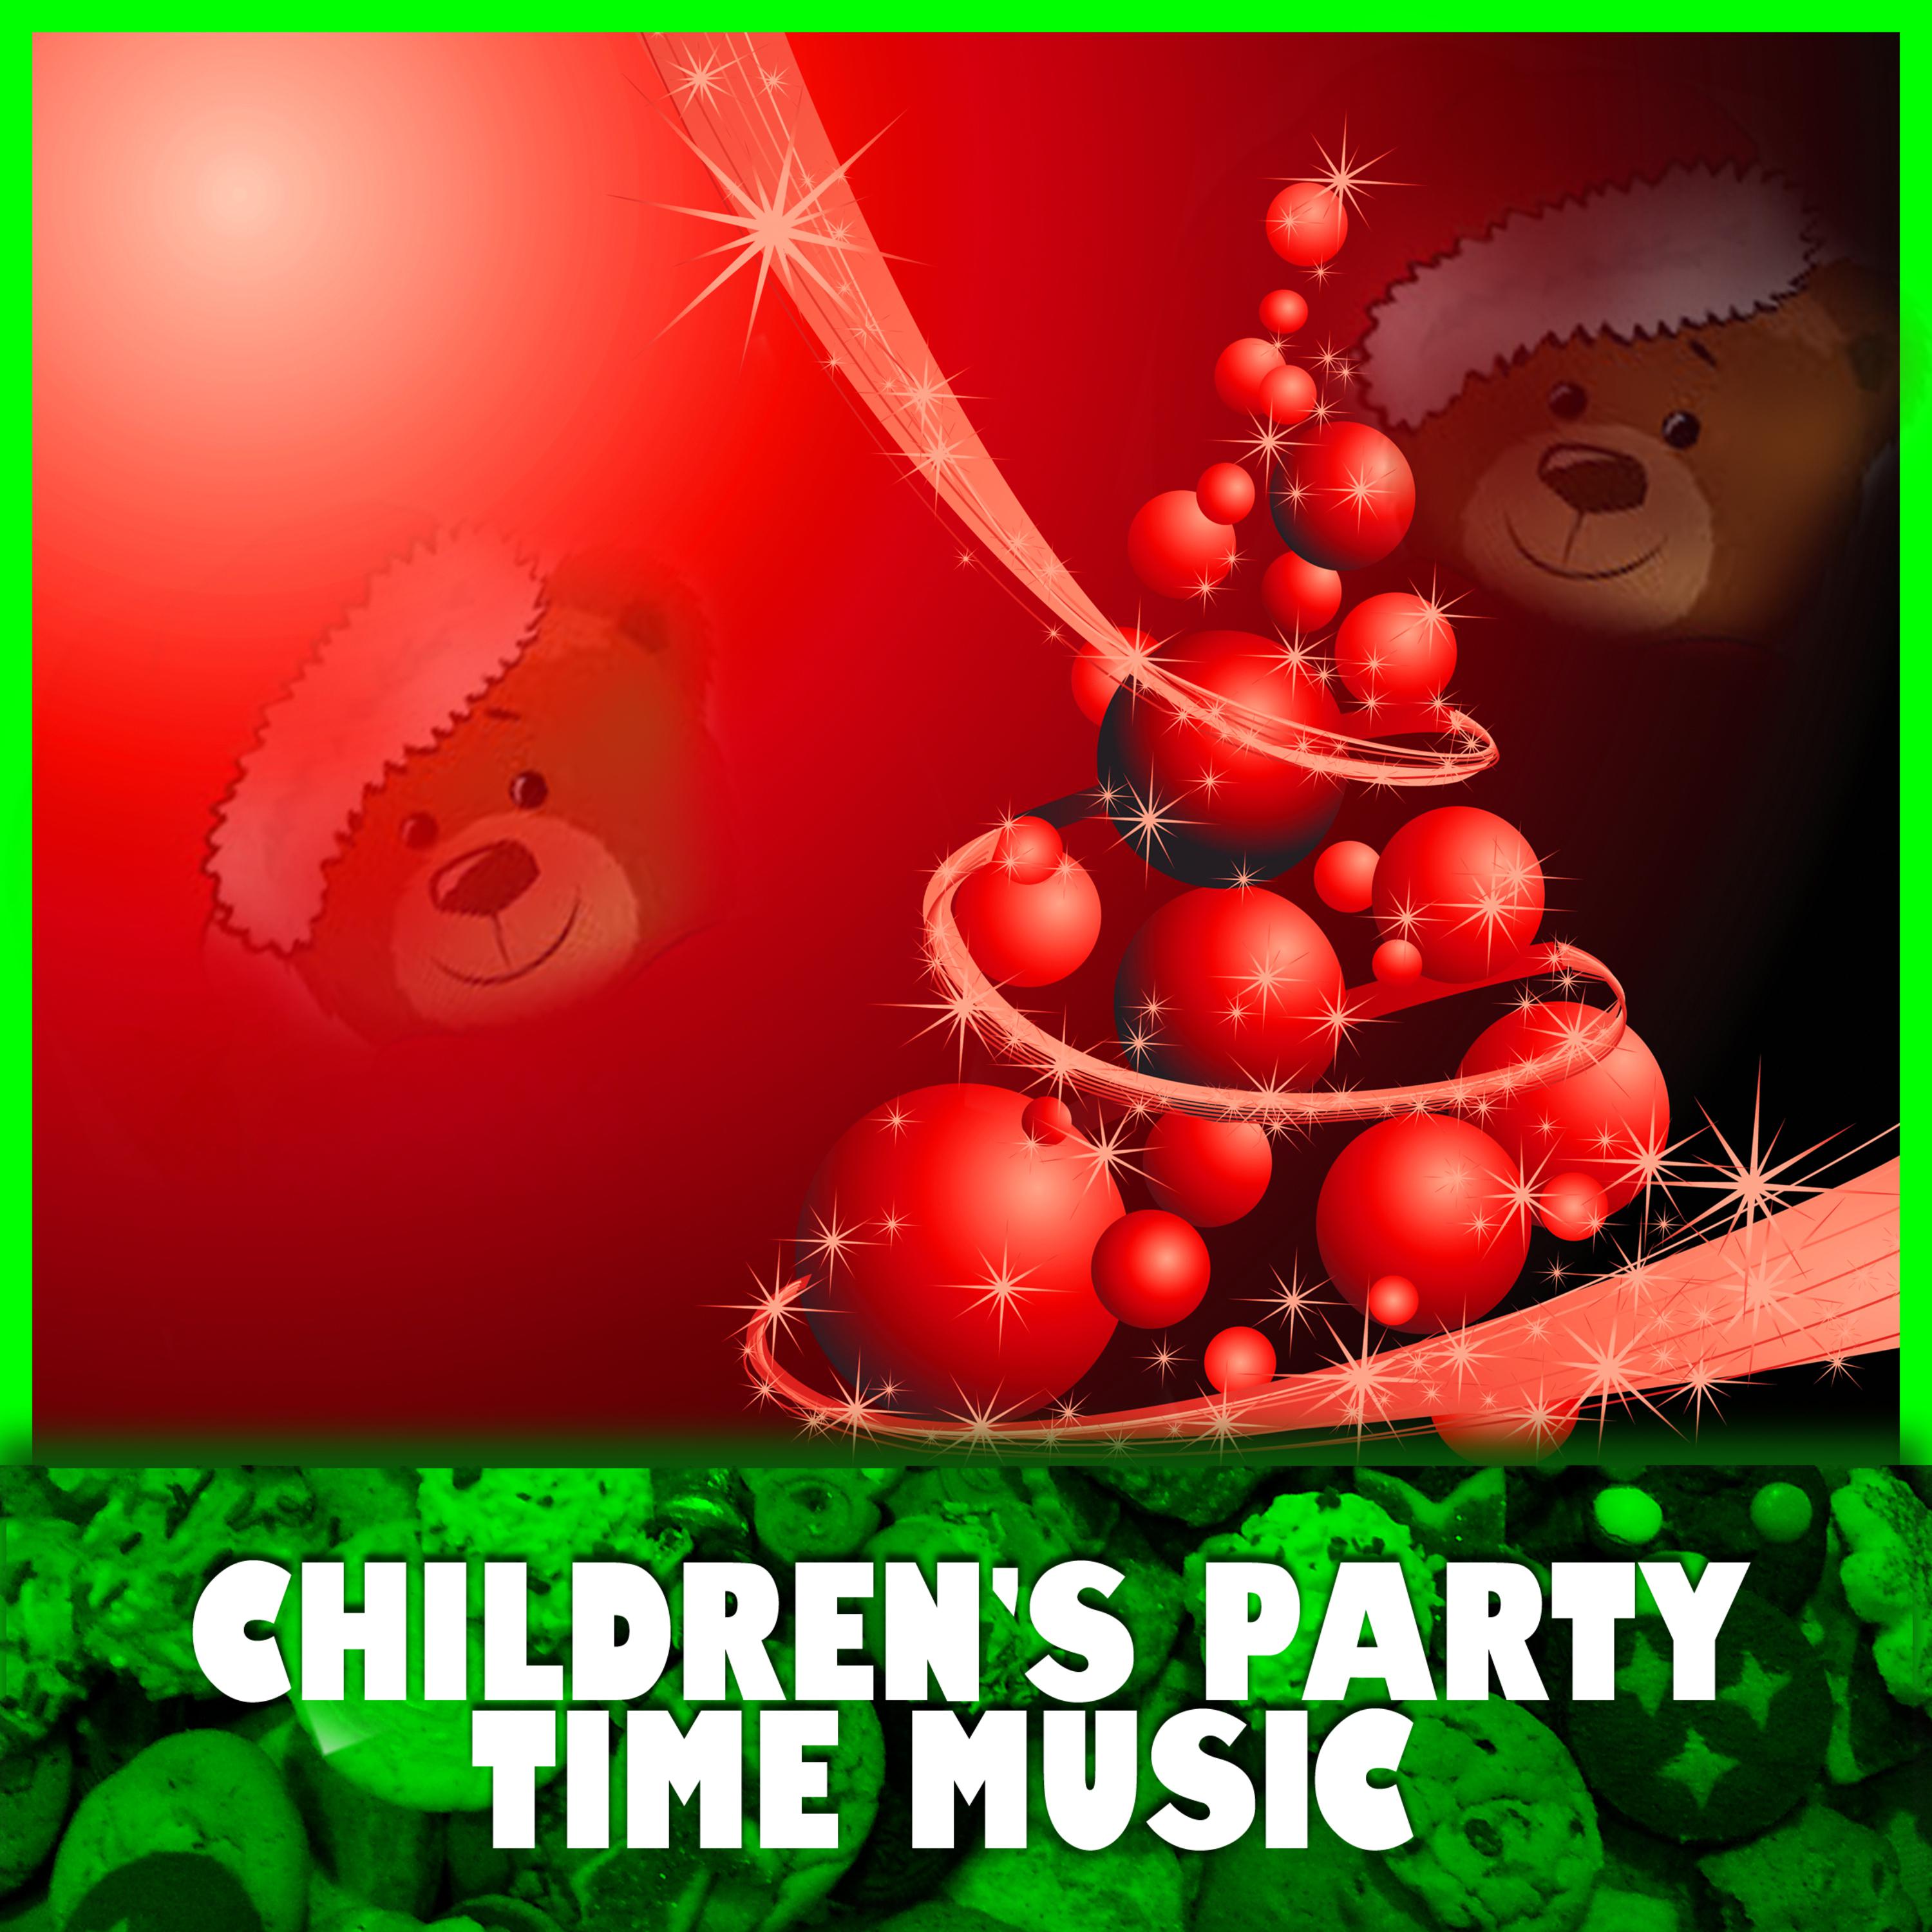 Children's Party Time Music